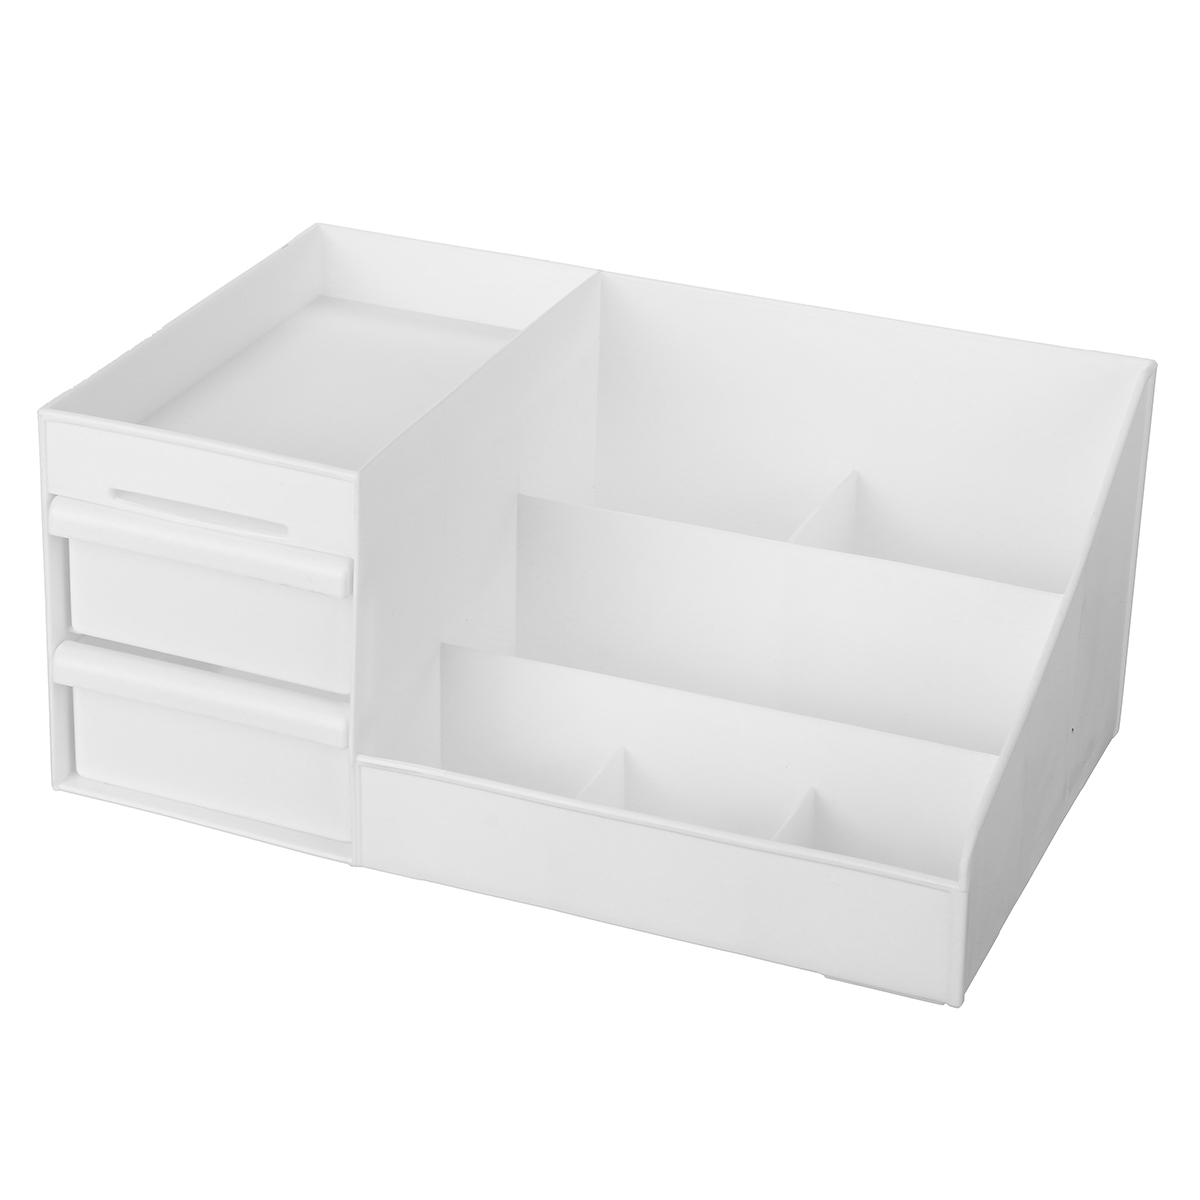 Plastic-Cosmetic-Makeup-Storage-Box-Organizer-Case-Holder-Jewelry-with-Drawer-1700918-7